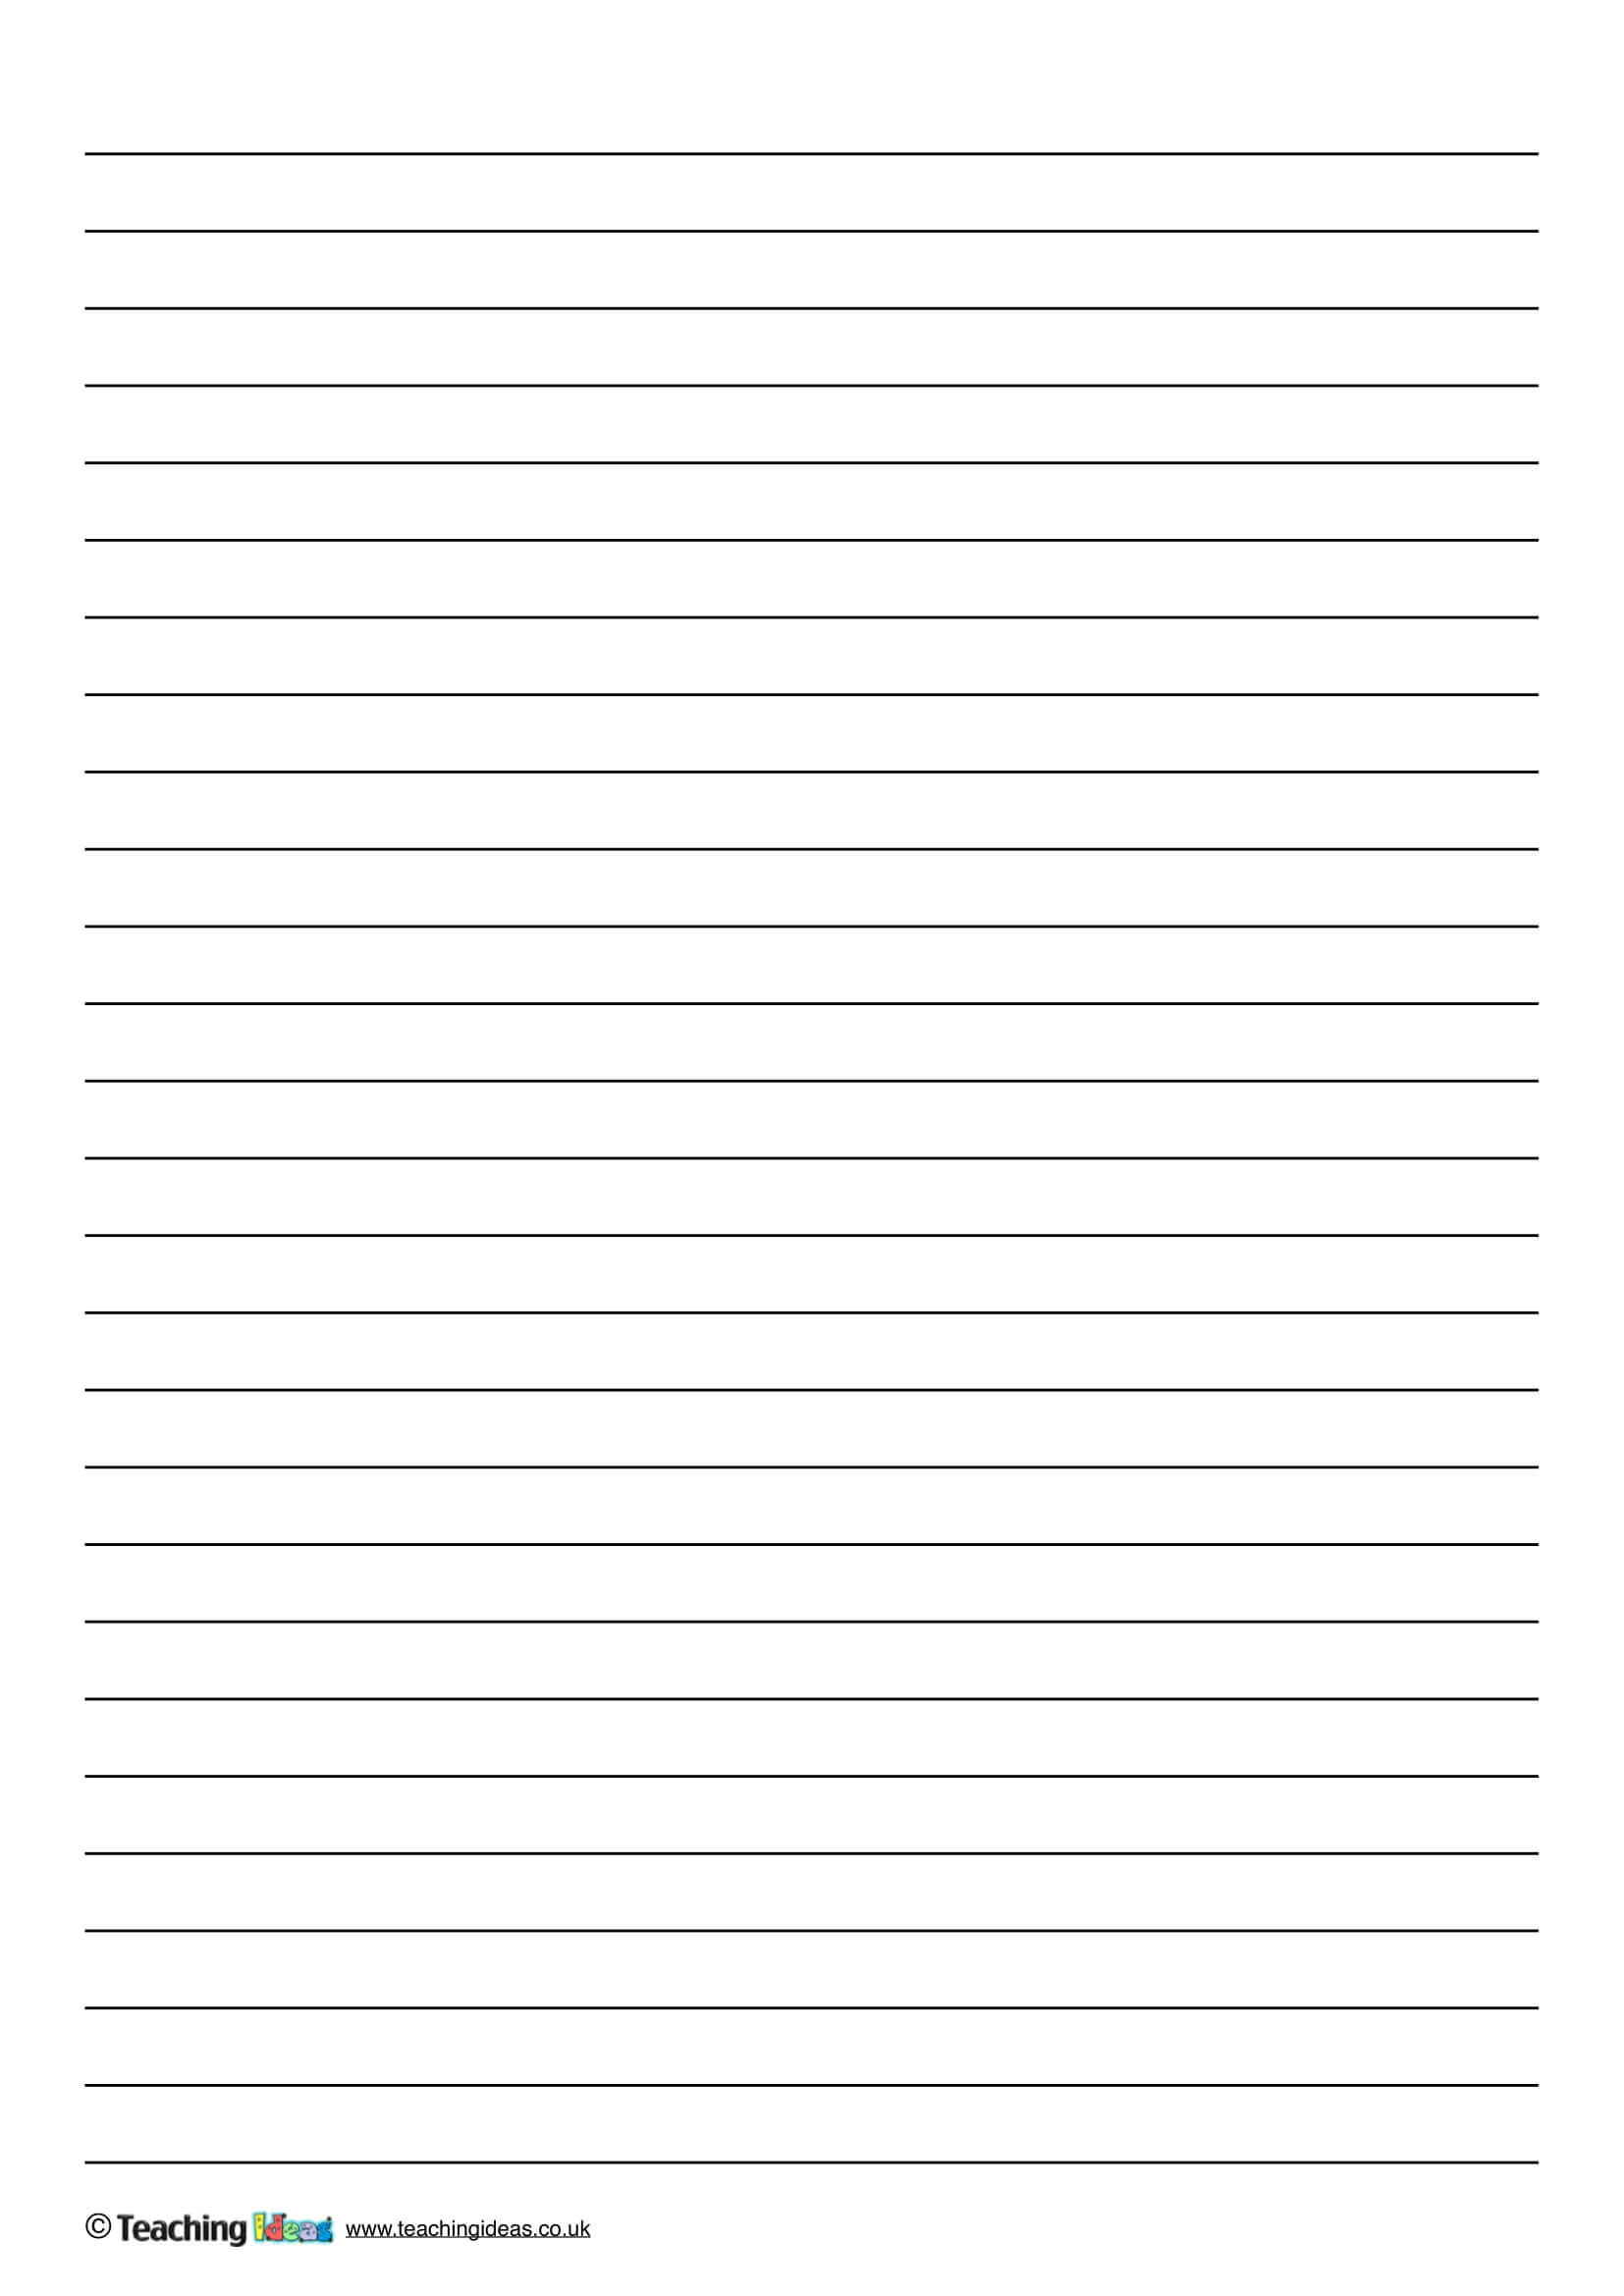 11+ Lined Paper Templates – Pdf | Free & Premium Templates Intended For Ruled Paper Word Template